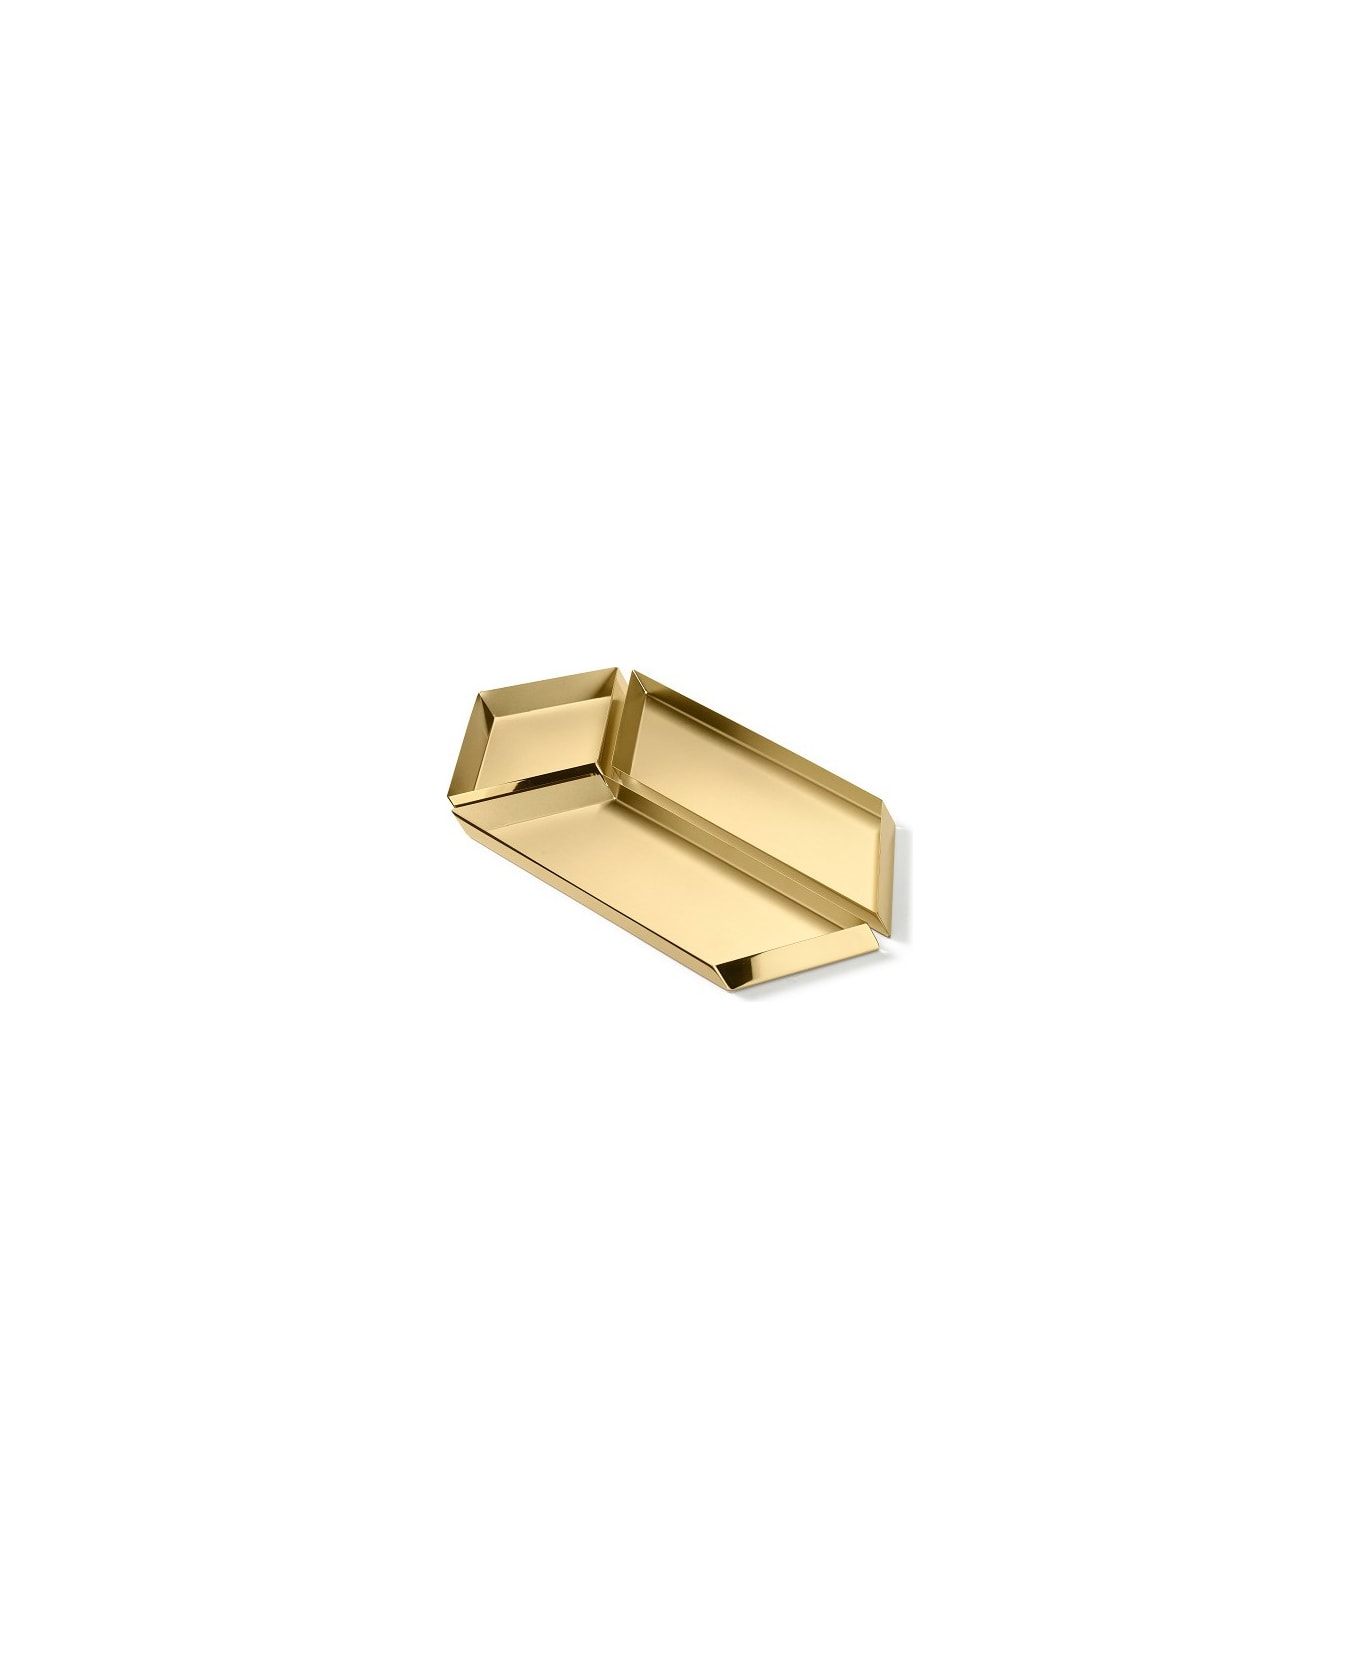 Ghidini 1961 Axonometry - Large Parallelepiped Polished Brass - Polished brass